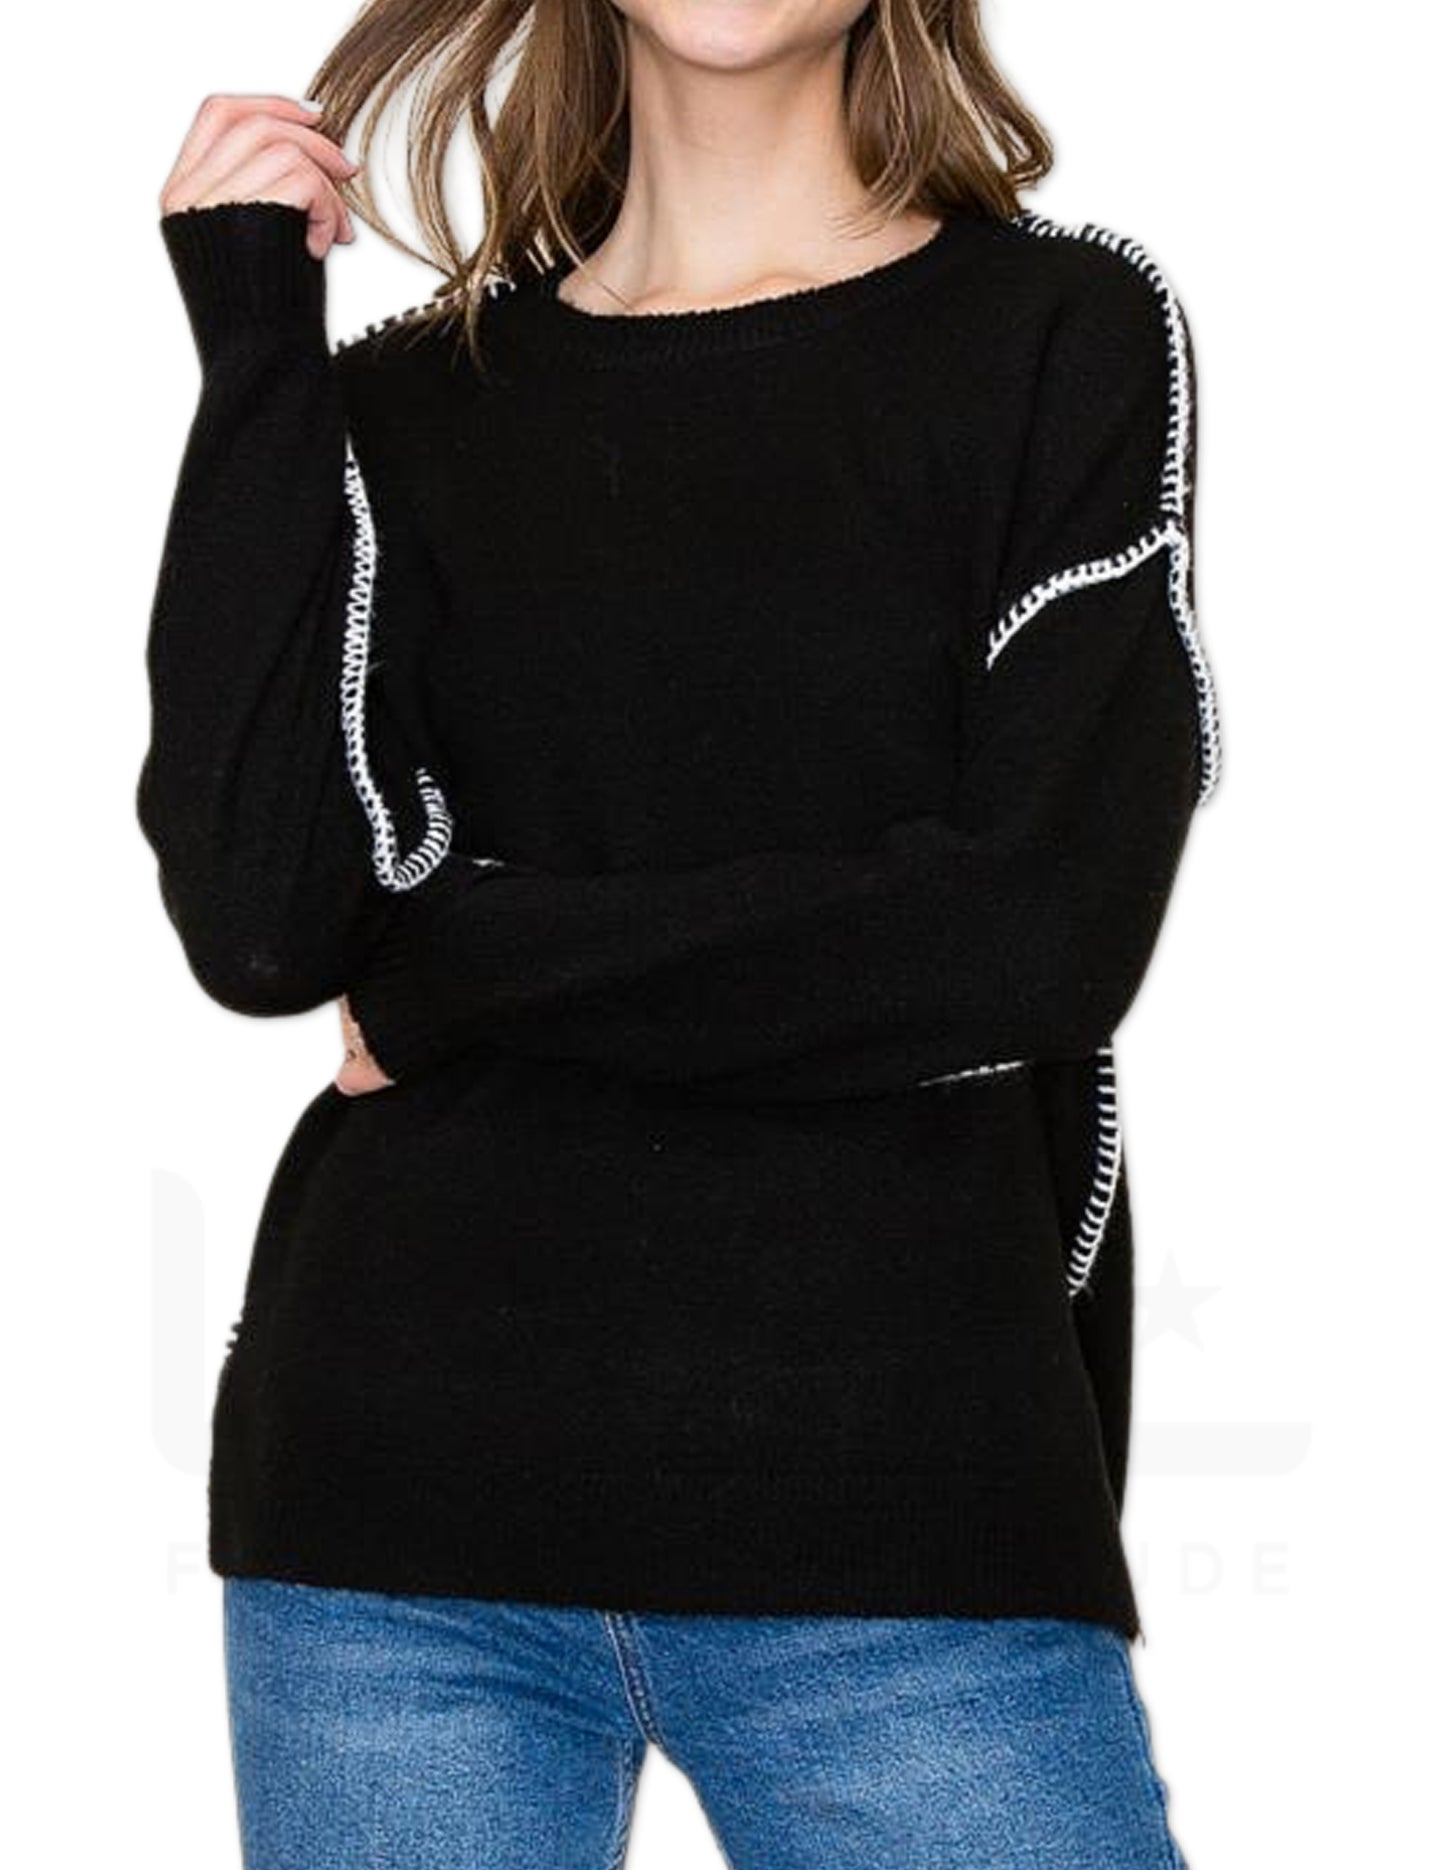 Super Soft Seam Detail Sweater - Black and Ivory